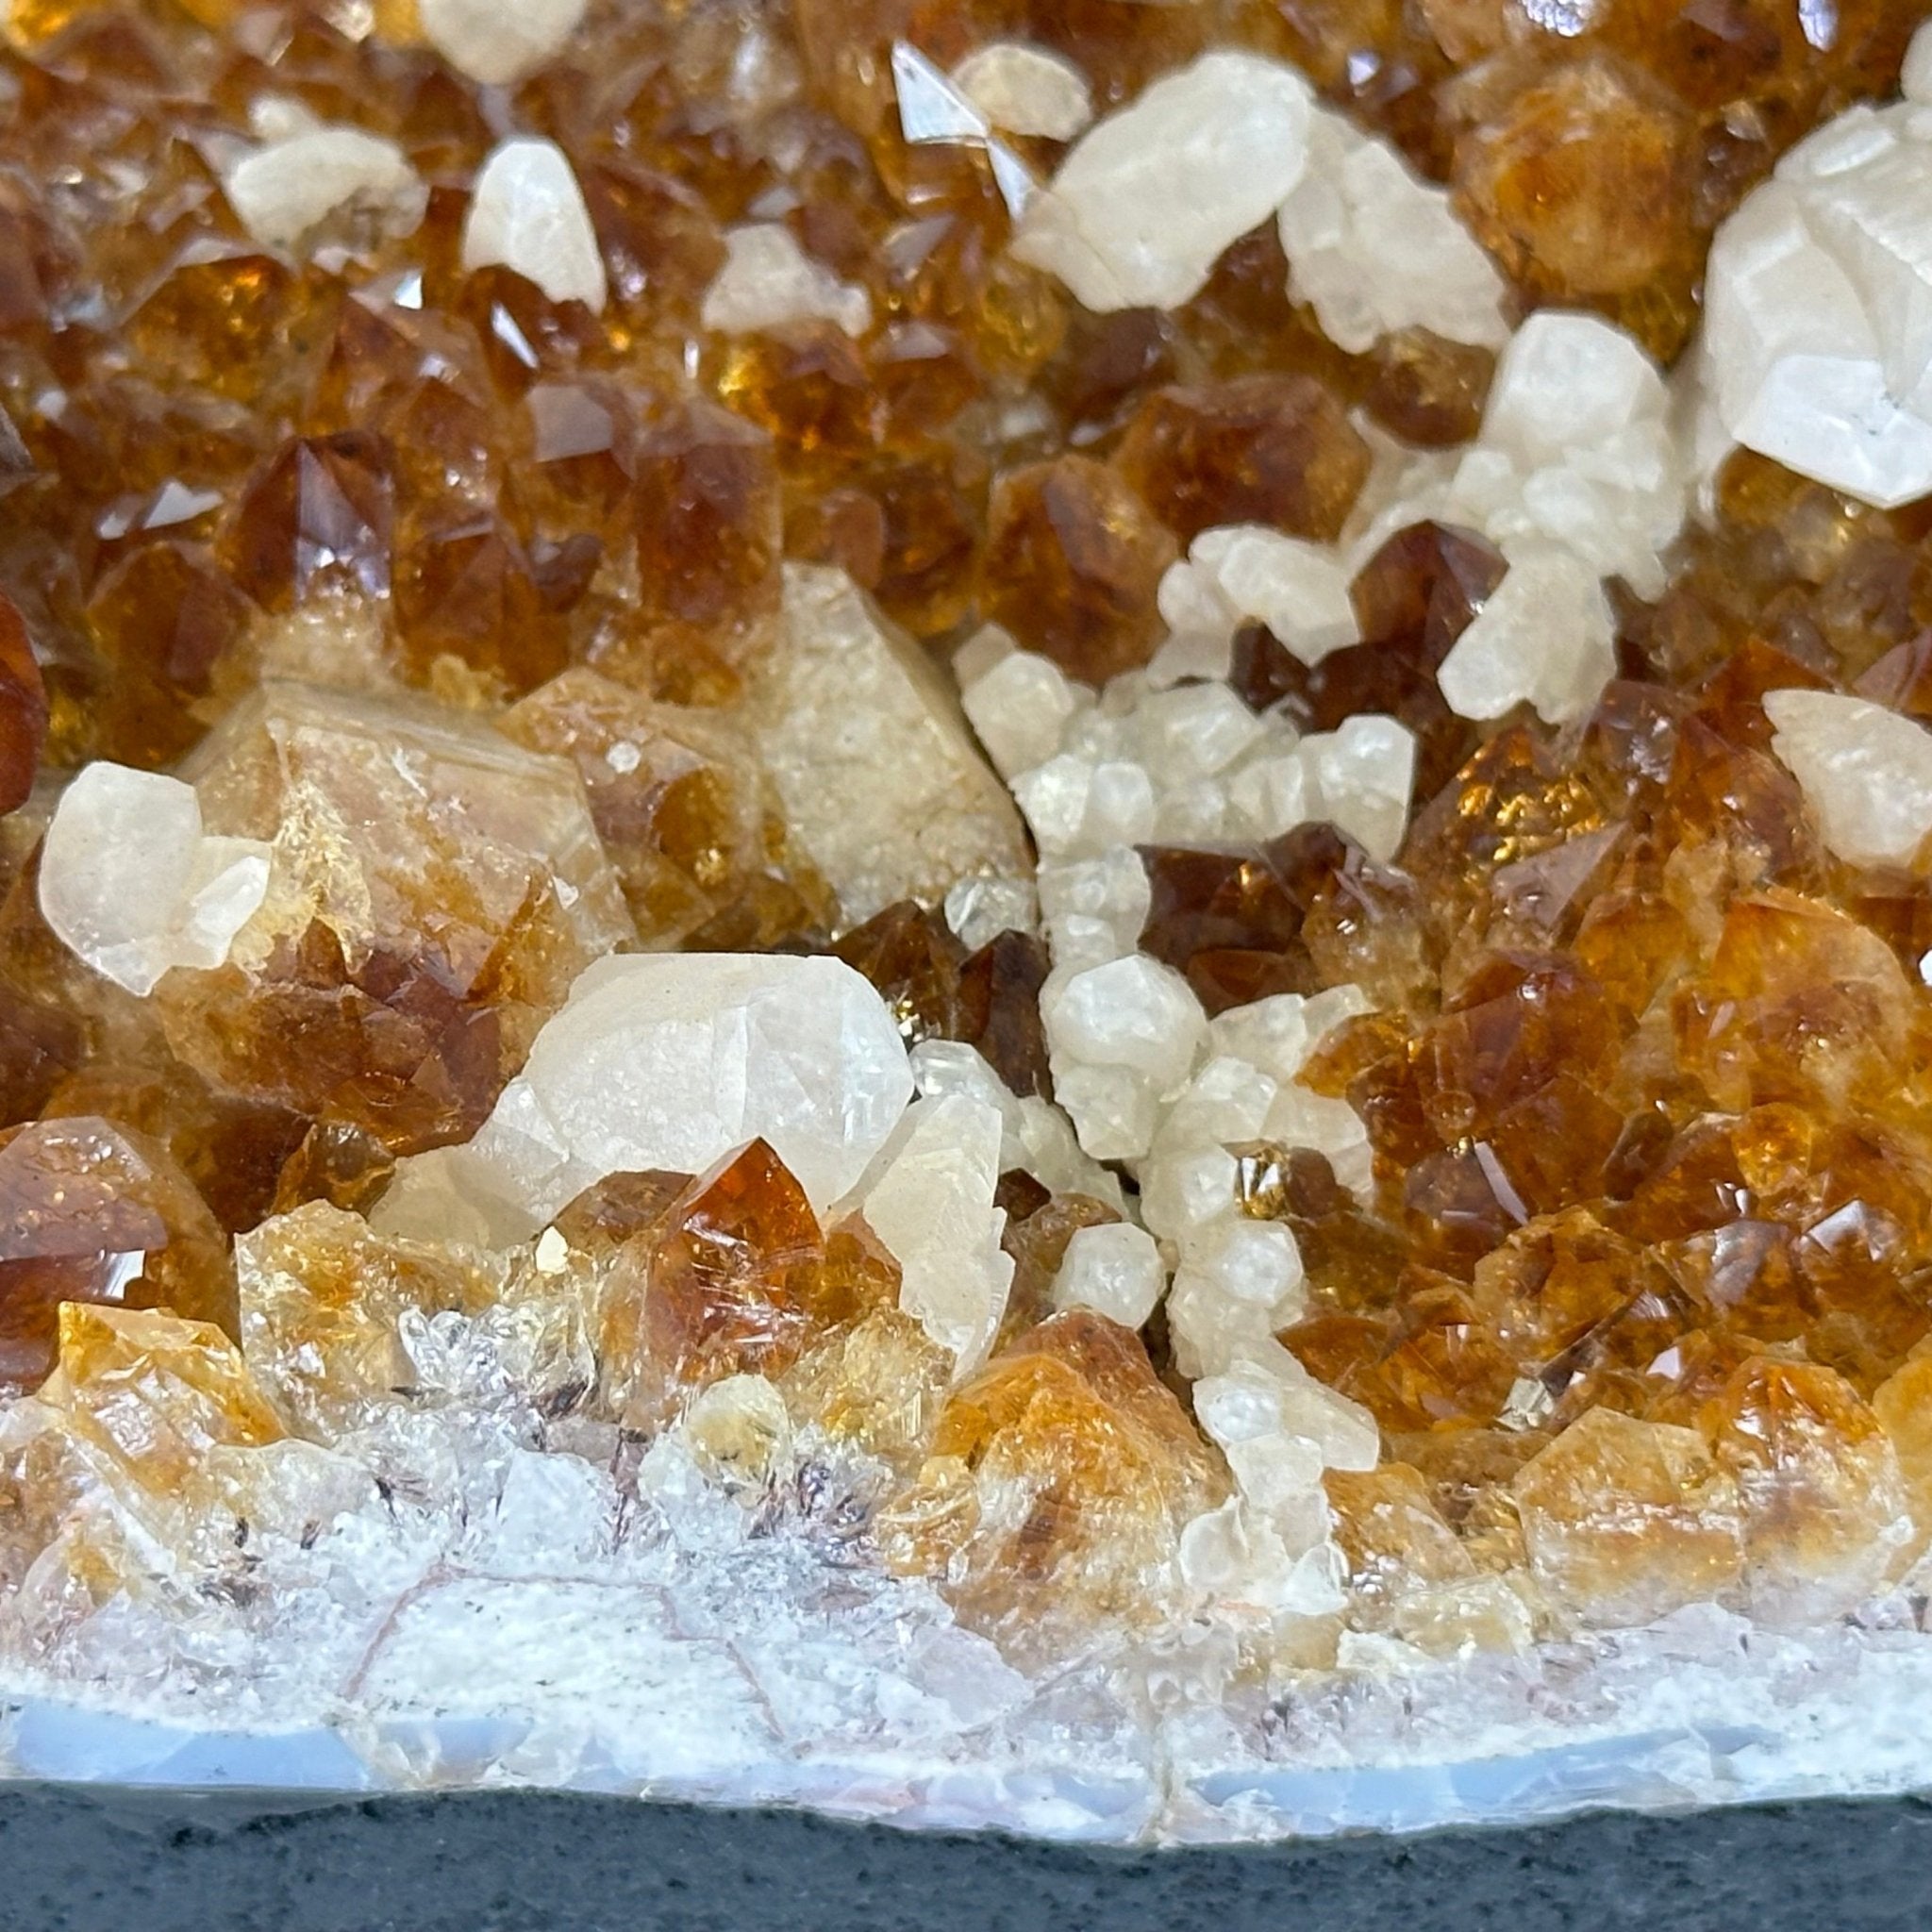 Quality Open 2 - Sided Brazilian Citrine Cathedral, 18 lbs and 11.7" Tall #5608 - 0044 - Brazil GemsBrazil GemsQuality Open 2 - Sided Brazilian Citrine Cathedral, 18 lbs and 11.7" Tall #5608 - 0044Open 2 - Sided Cathedrals5608 - 0044